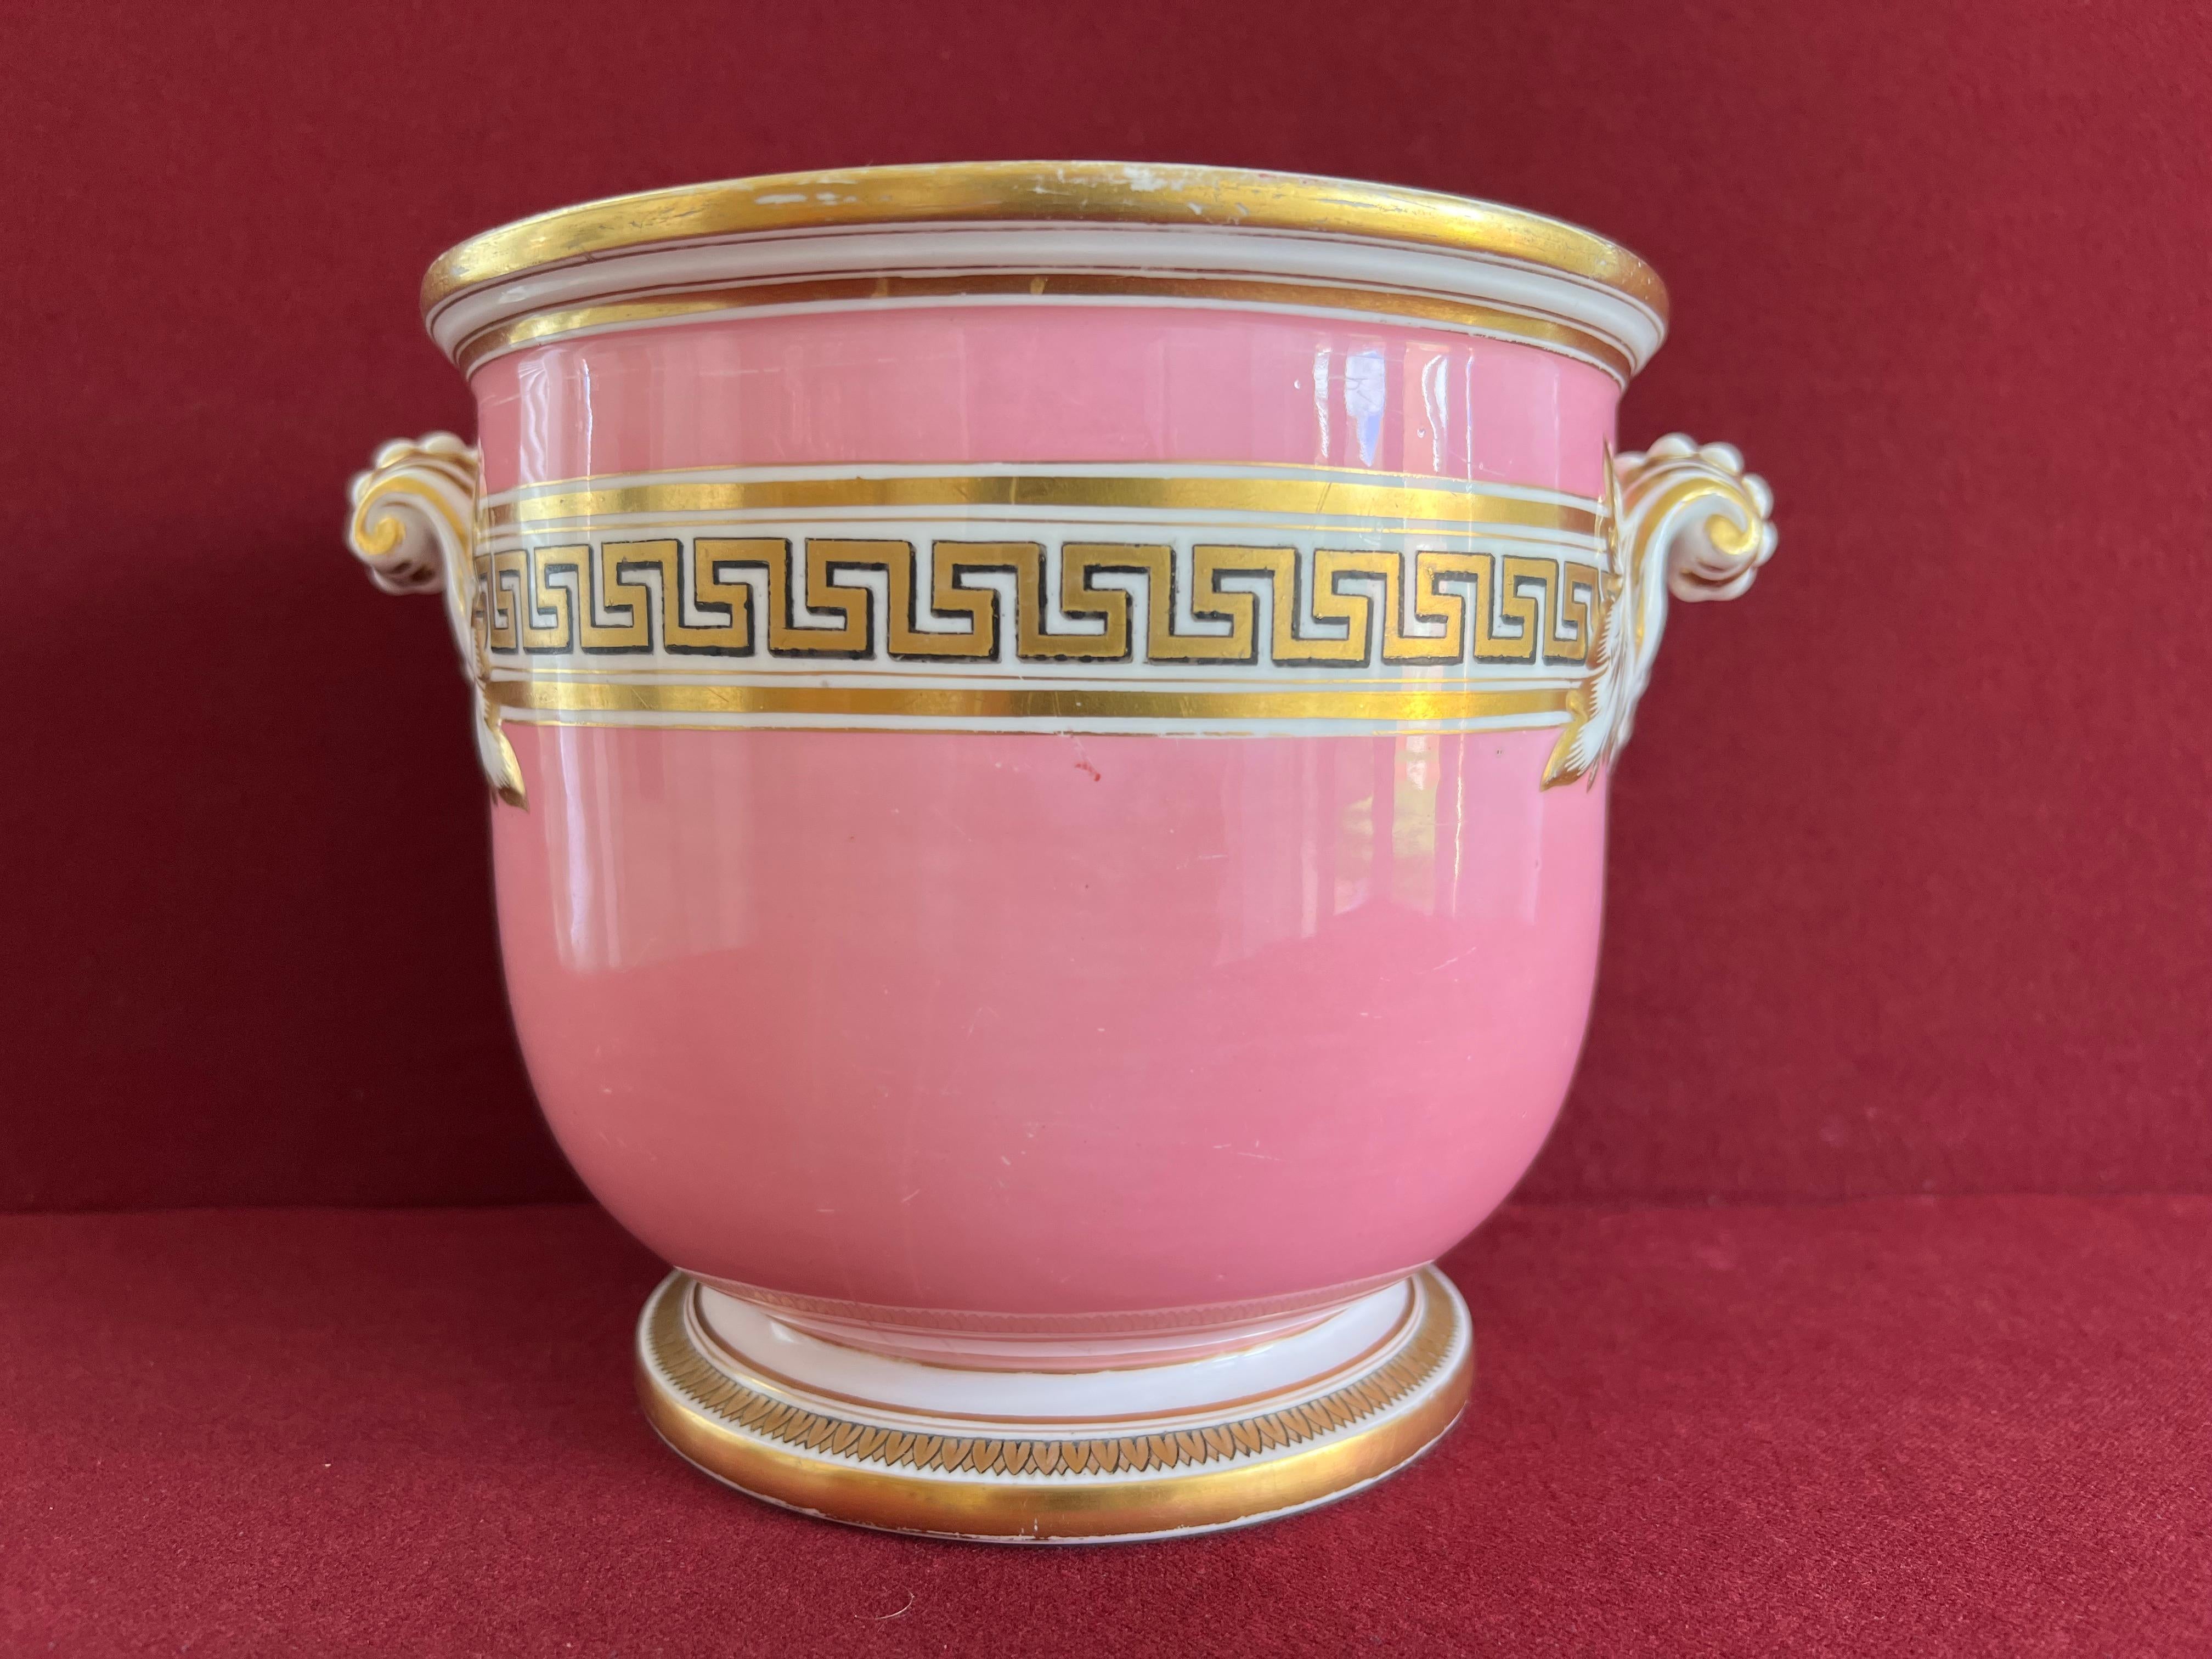 A fine Victorian Minton Porcelain Jardiniere circa 1850. Finely decorated with a pink ground and a band of Greek-key decoration in gold.
Each side of the Jardiniere with fixed scroll handles with white beading and acanthus leave terminals.